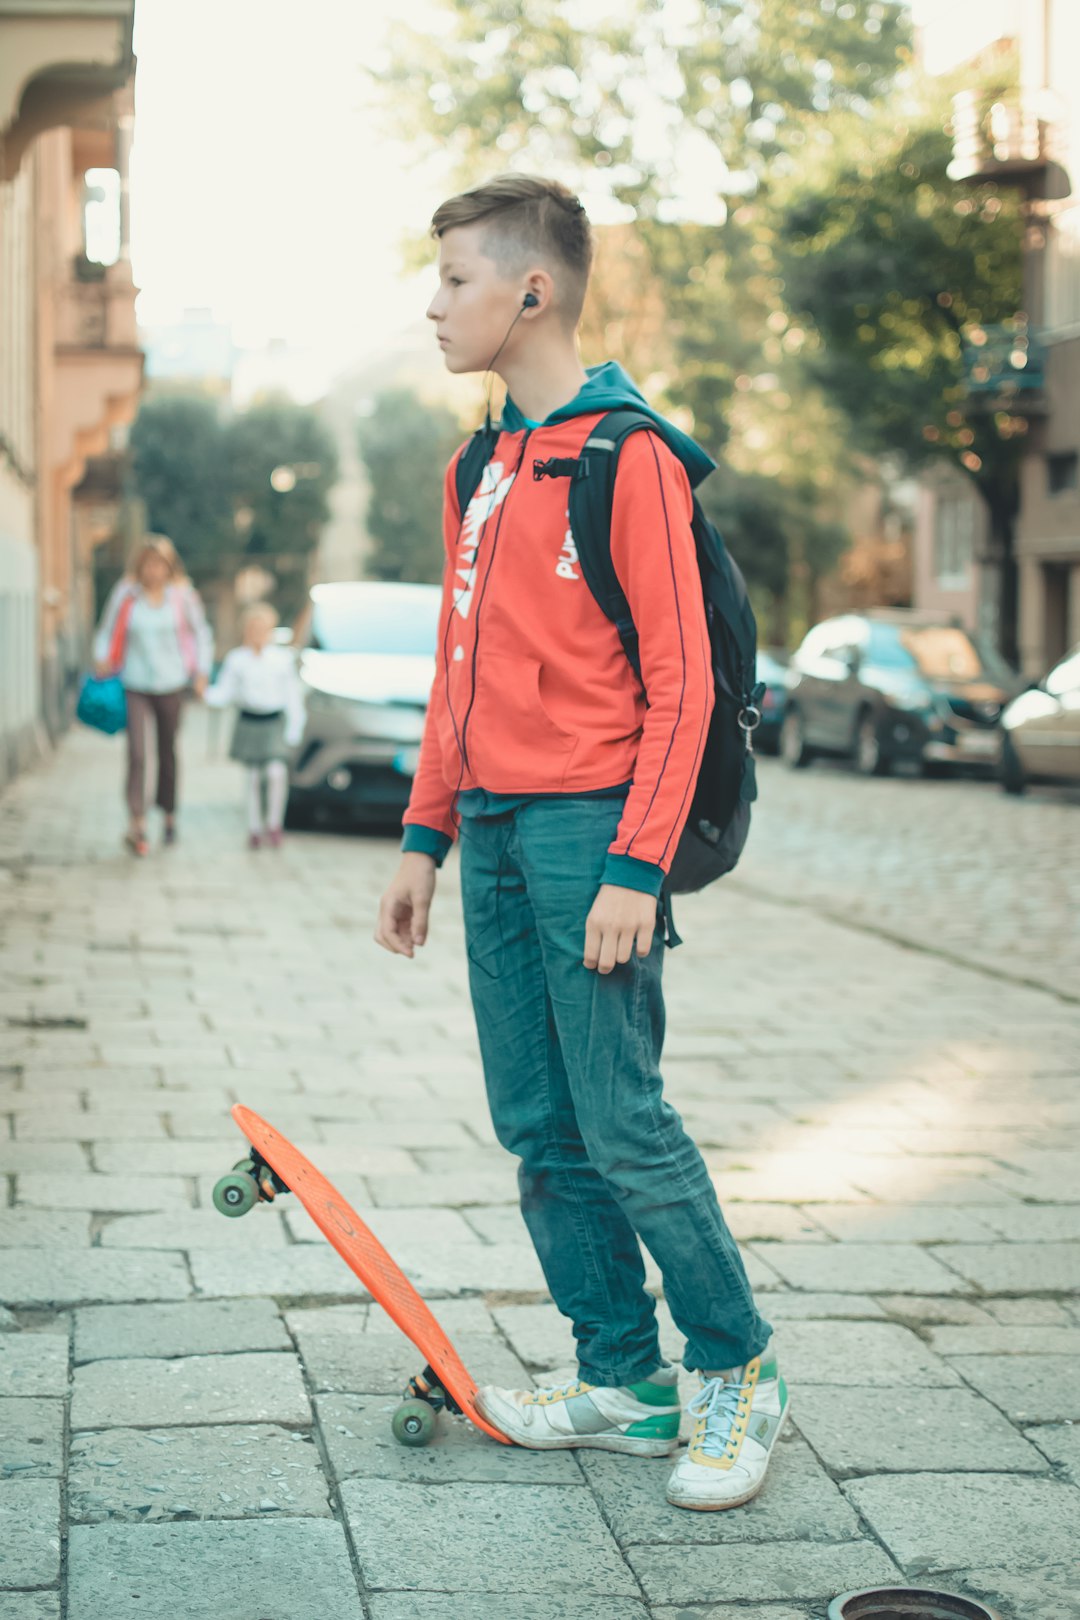 boy with backpack and earbuds standing near orange skateboard